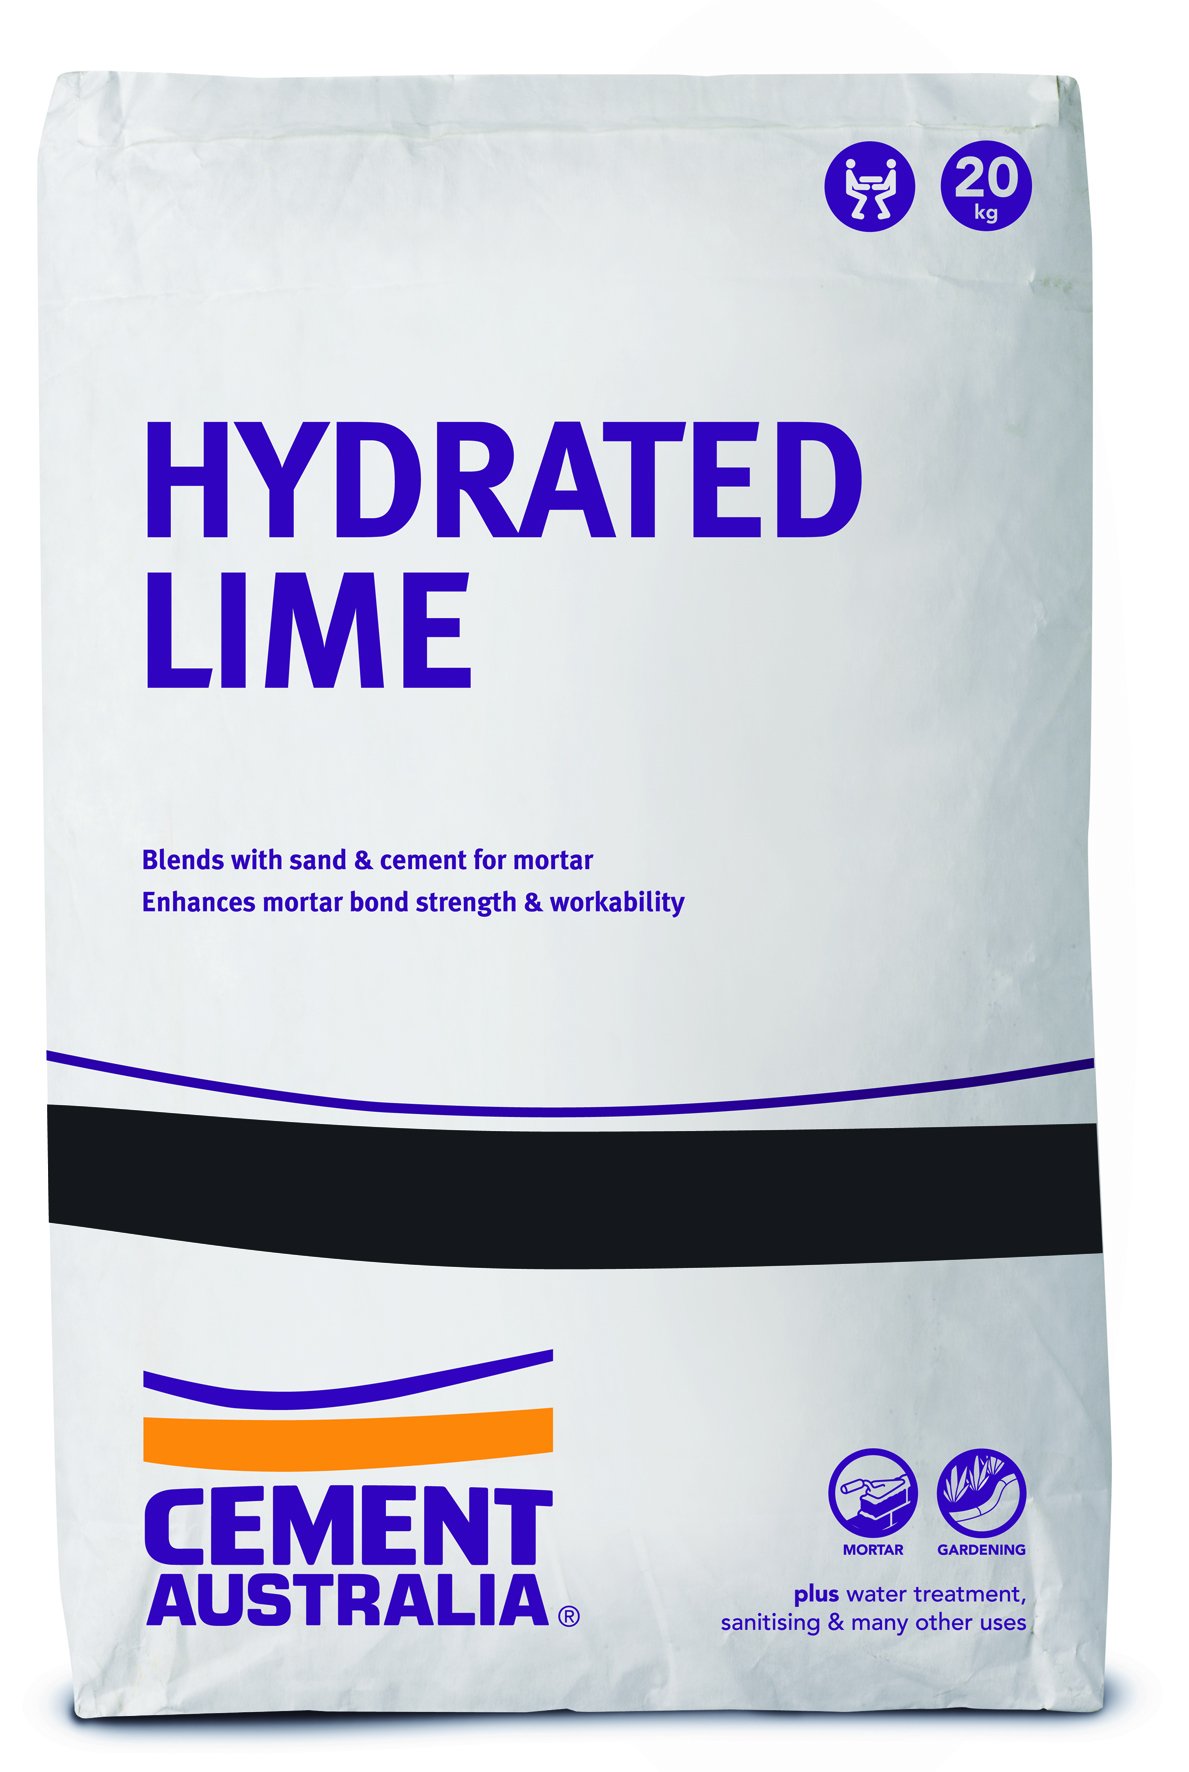 CEMENT AUSTRALIA HYDRATED LIME 20KG BAG